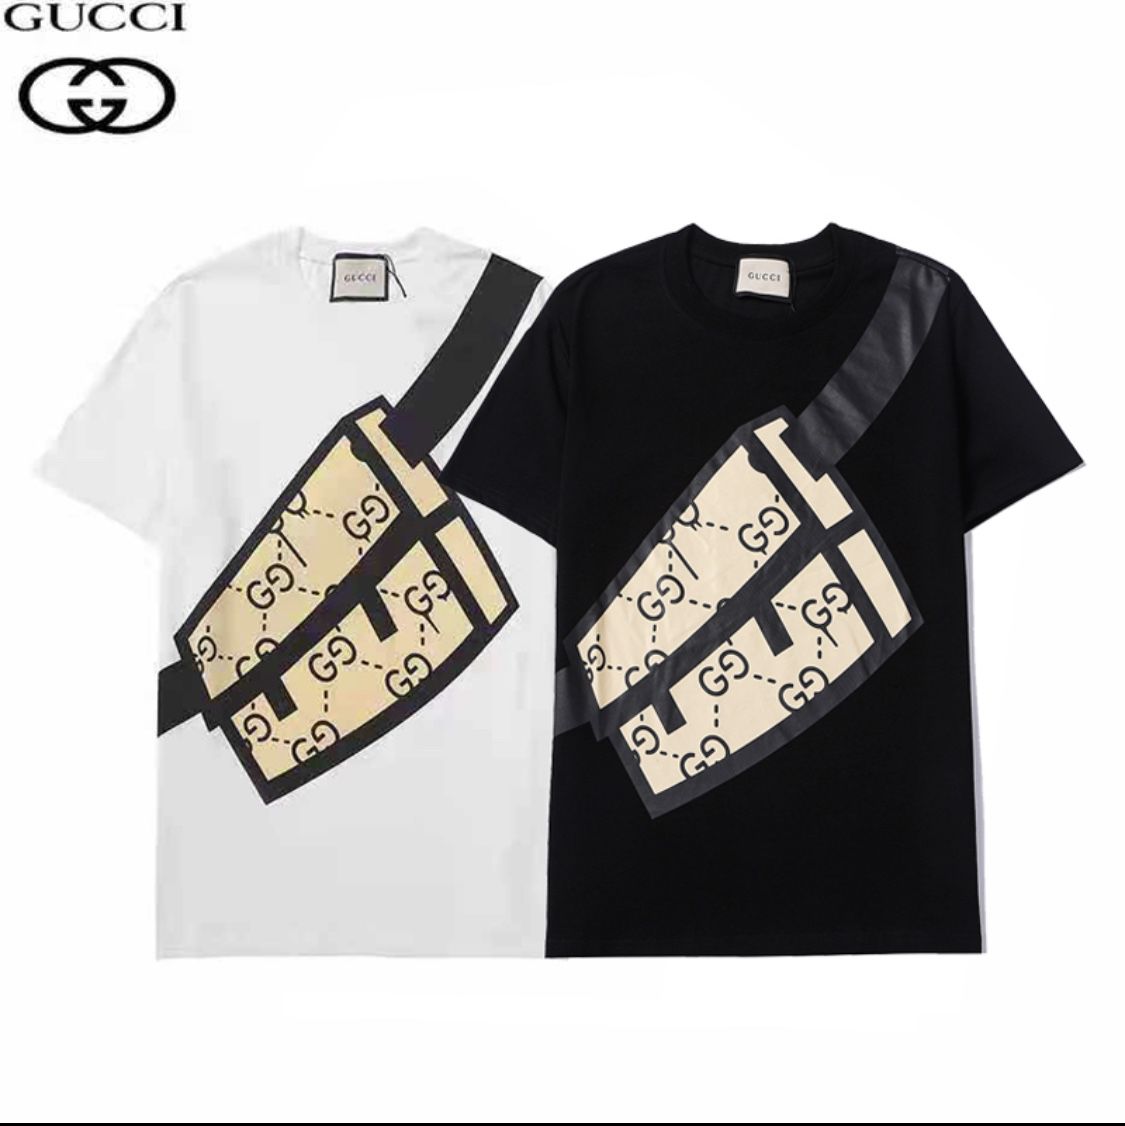  Beautiful Gucci T-shirt Edition 2021, See Description For Details …